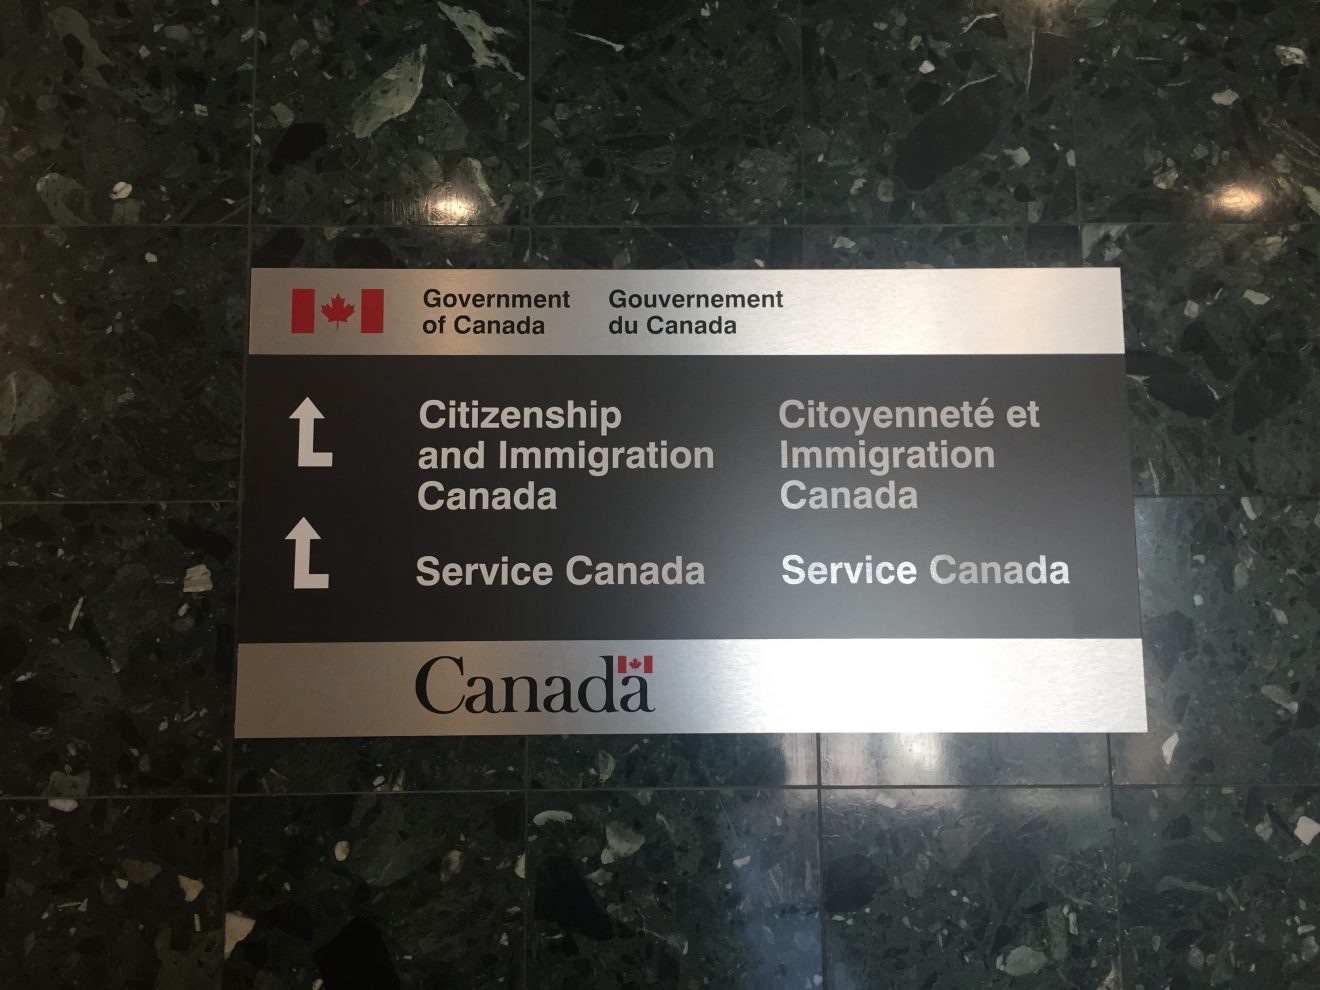 immigration sign